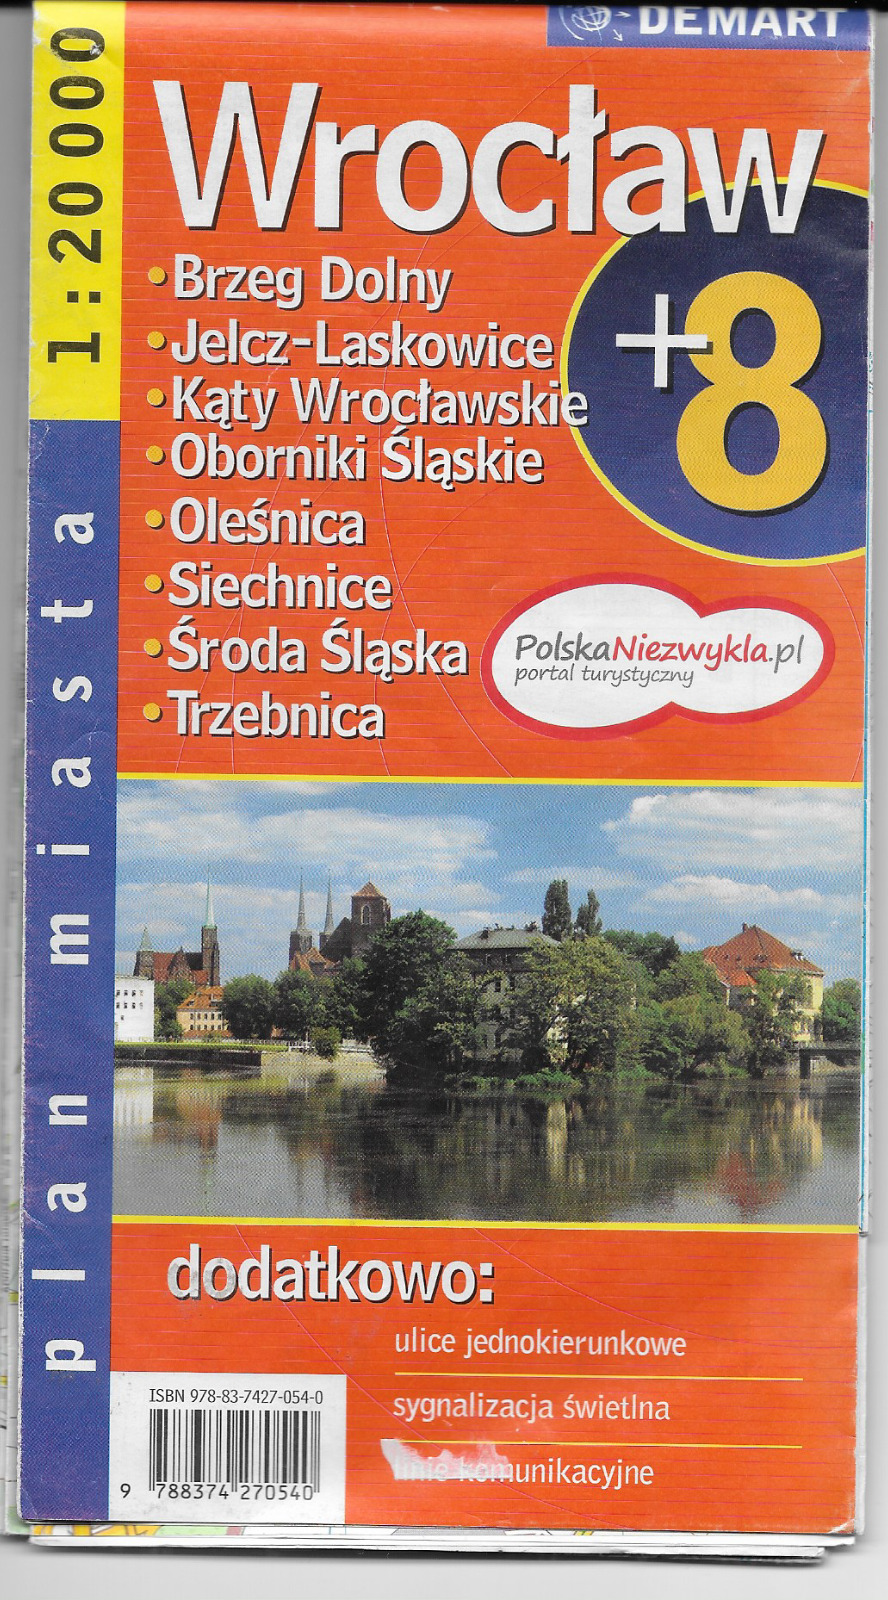 Demart Wroclaw, Poland Road Map plus 8 other cities in gently used.